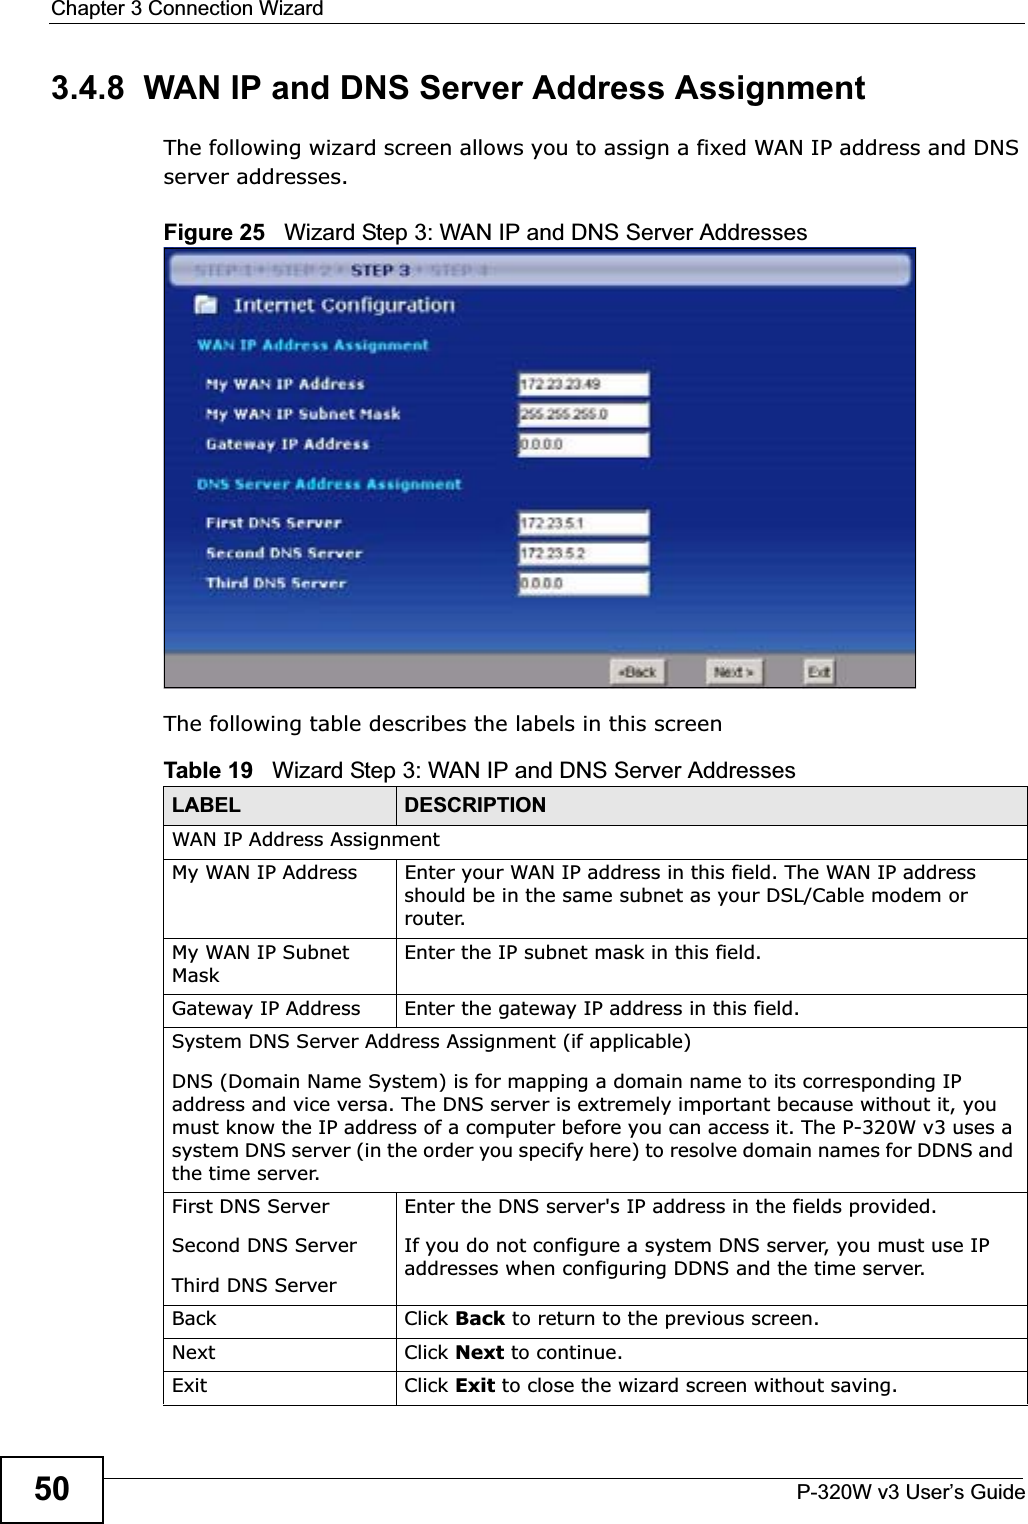 Chapter 3 Connection WizardP-320W v3 User’s Guide503.4.8  WAN IP and DNS Server Address AssignmentThe following wizard screen allows you to assign a fixed WAN IP address and DNS server addresses. Figure 25   Wizard Step 3: WAN IP and DNS Server AddressesThe following table describes the labels in this screenTable 19   Wizard Step 3: WAN IP and DNS Server AddressesLABEL DESCRIPTIONWAN IP Address Assignment My WAN IP Address Enter your WAN IP address in this field. The WAN IP address should be in the same subnet as your DSL/Cable modem or router.My WAN IP Subnet MaskEnter the IP subnet mask in this field.Gateway IP Address  Enter the gateway IP address in this field. System DNS Server Address Assignment (if applicable)DNS (Domain Name System) is for mapping a domain name to its corresponding IP address and vice versa. The DNS server is extremely important because without it, you must know the IP address of a computer before you can access it. The P-320W v3 uses a system DNS server (in the order you specify here) to resolve domain names for DDNS and the time server.First DNS ServerSecond DNS Server Third DNS Server Enter the DNS server&apos;s IP address in the fields provided.If you do not configure a system DNS server, you must use IP addresses when configuring DDNS and the time server.Back Click Back to return to the previous screen.Next Click Next to continue. Exit Click Exit to close the wizard screen without saving.